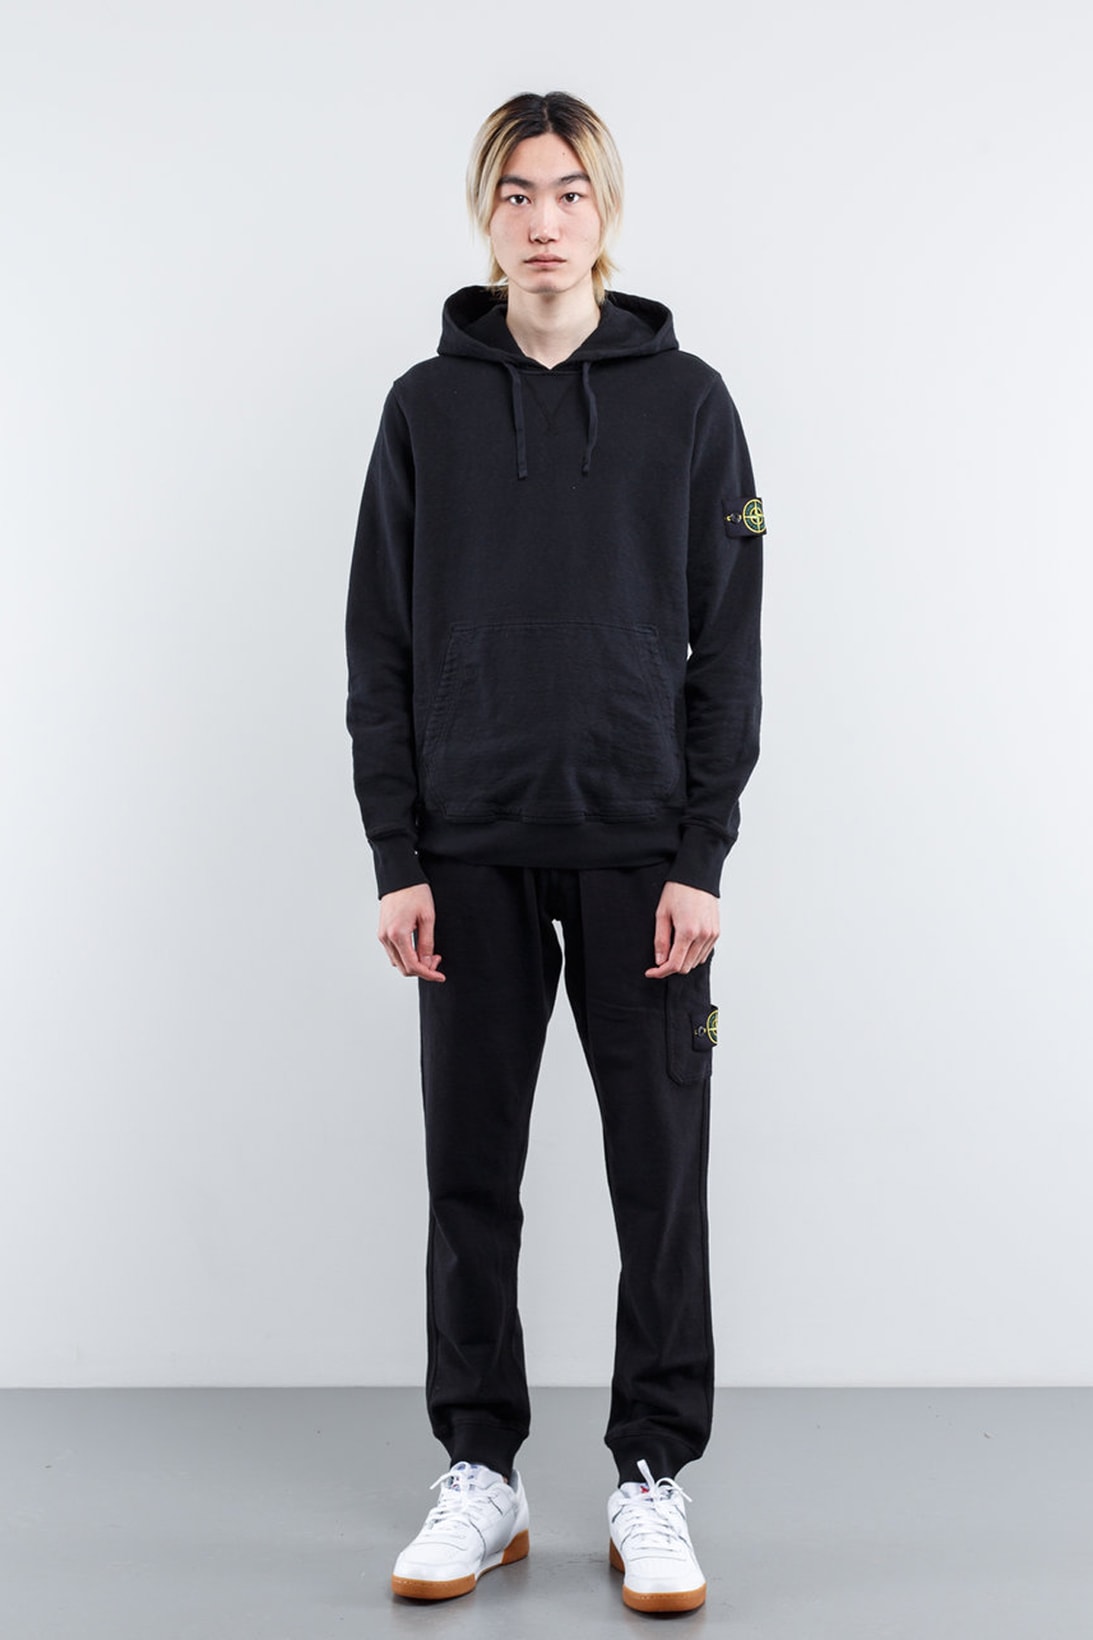 Buy Stone Island 2017 Spring/Summer Collection Now